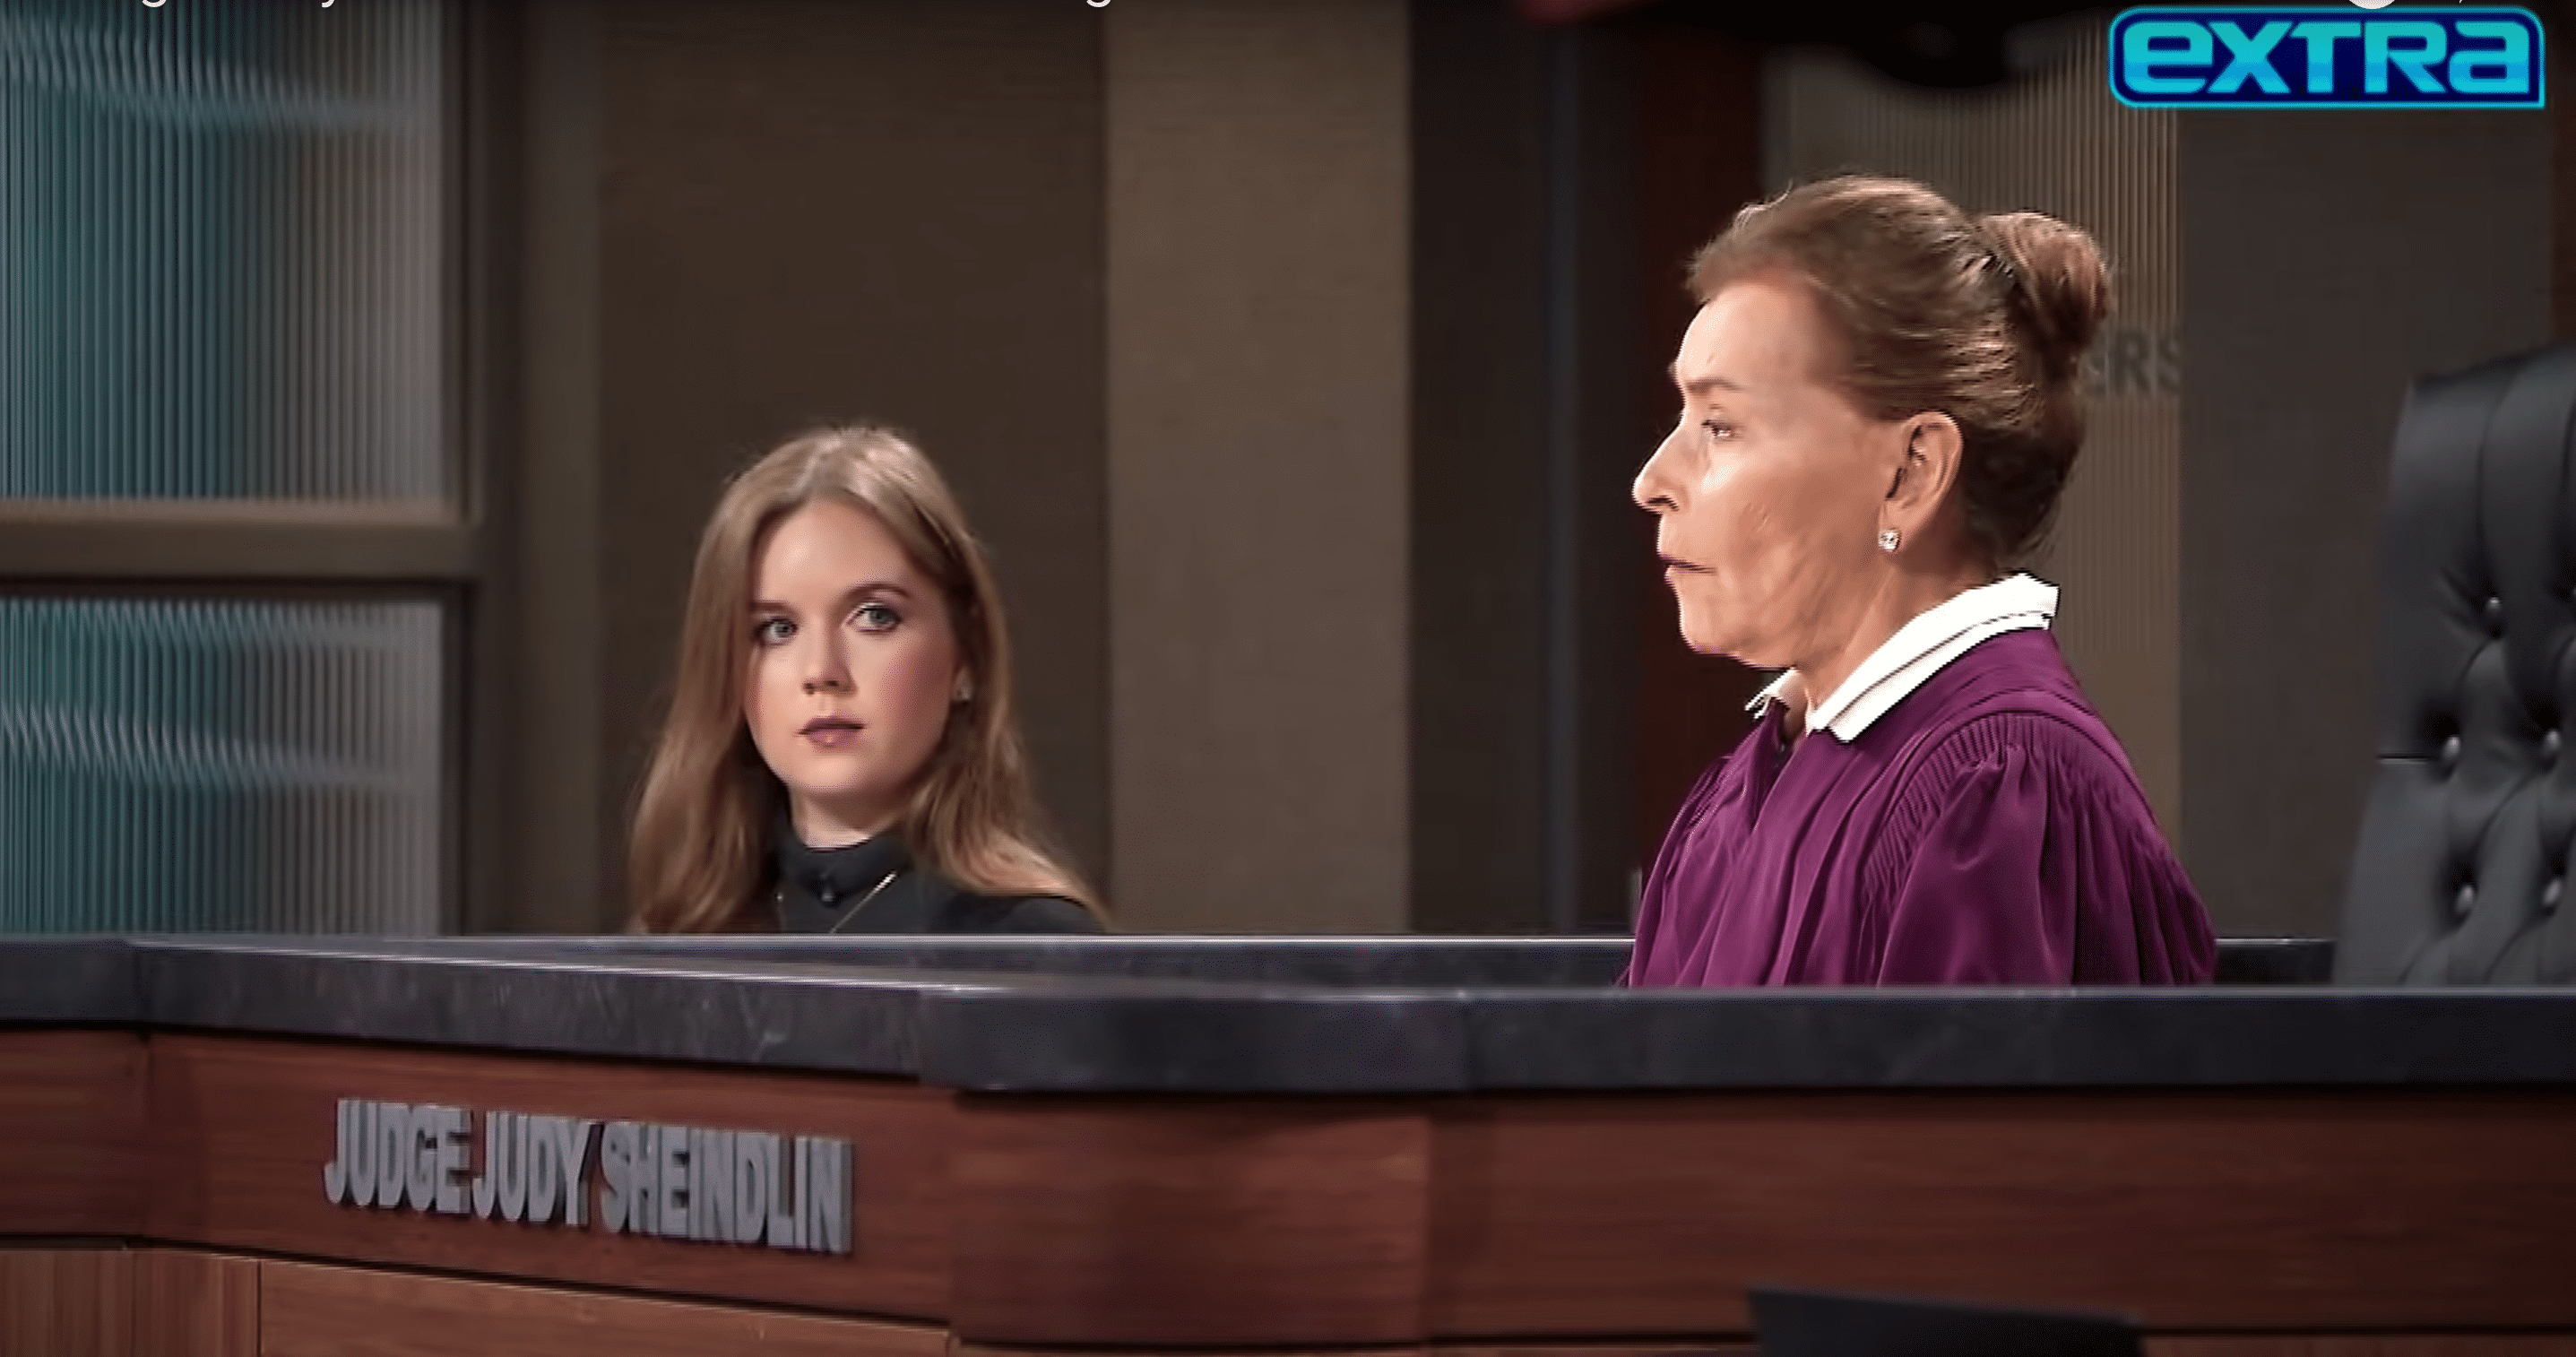 Nana Judge Judy Instilled Her Character Traits Into Lookalike Granddaughter And Showed Softer